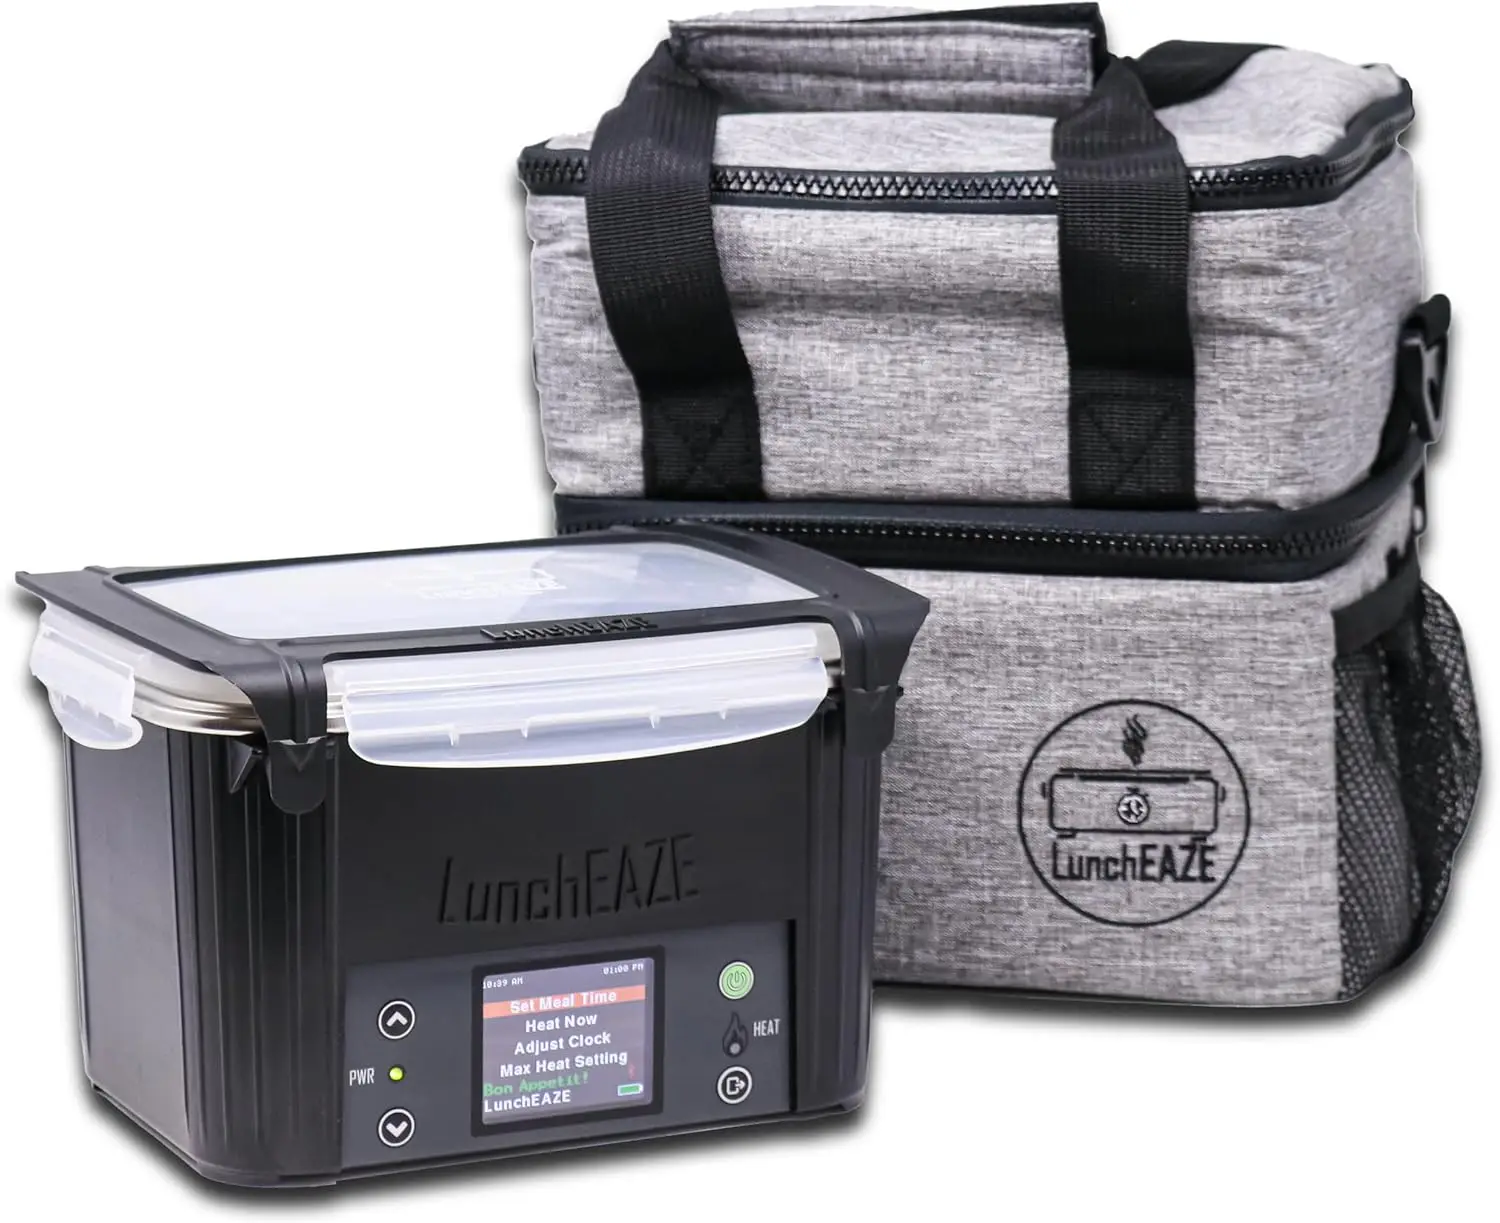 

LunchEAZE Electric Lunch Box – Self-Heating, Cordless, Battery Powered Food Warmer for Work, Travel– 220°F Heat, BPA Free